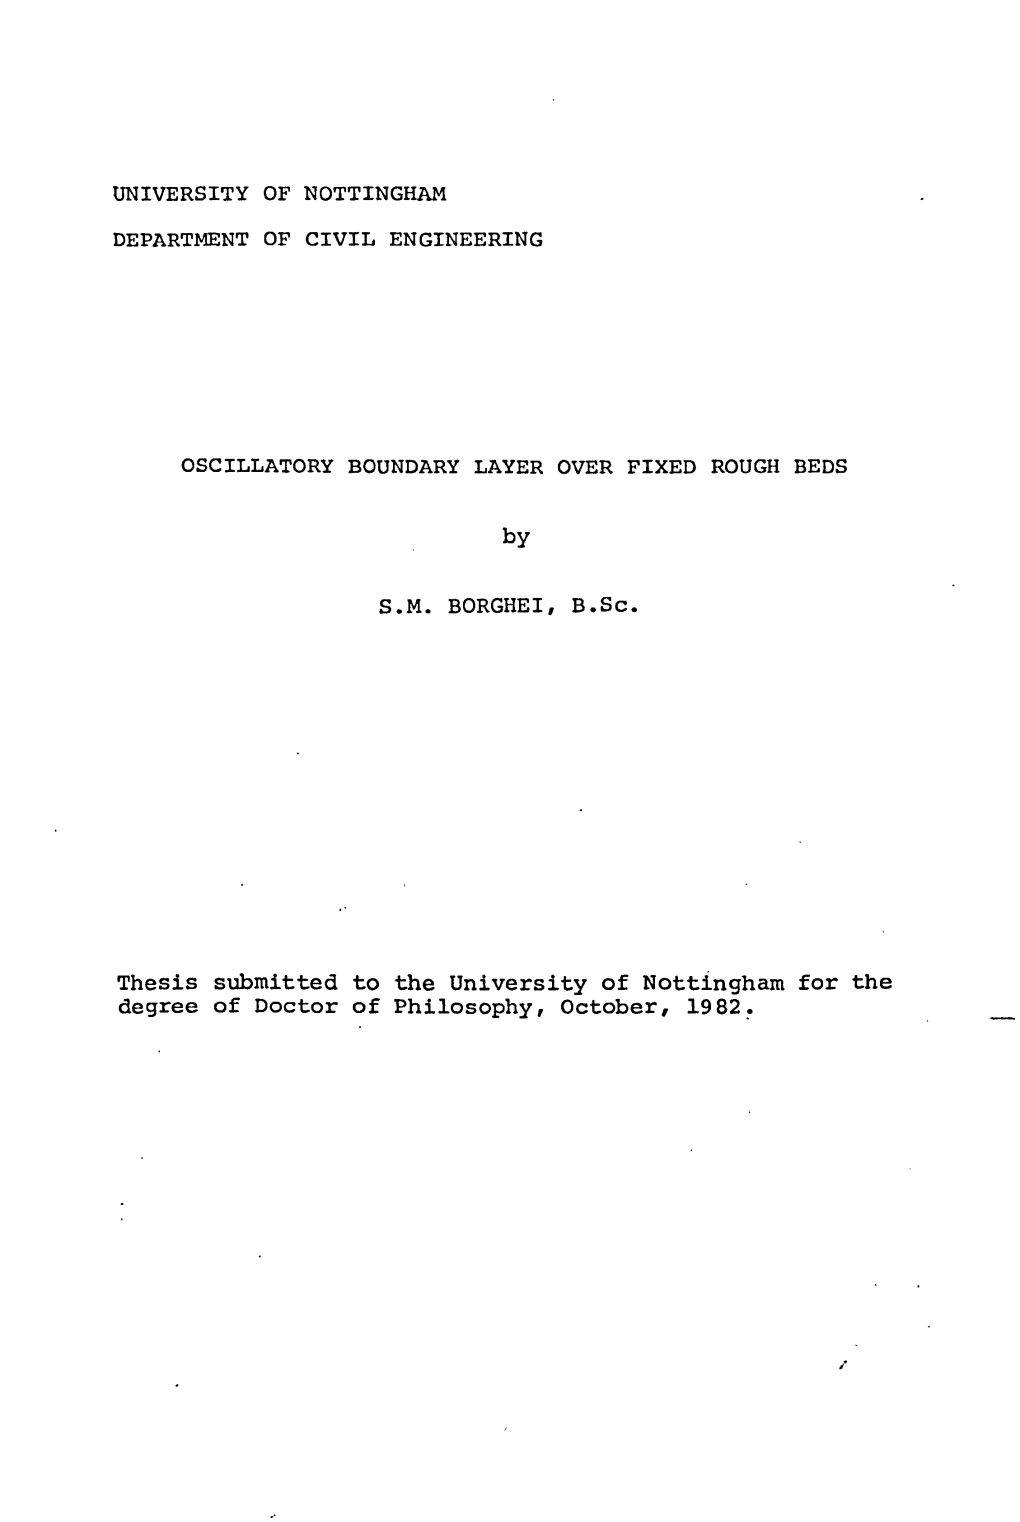 Thesis Submitted to the University of Nottingham for the Degree of Doctor of Philosophy, October, 1982